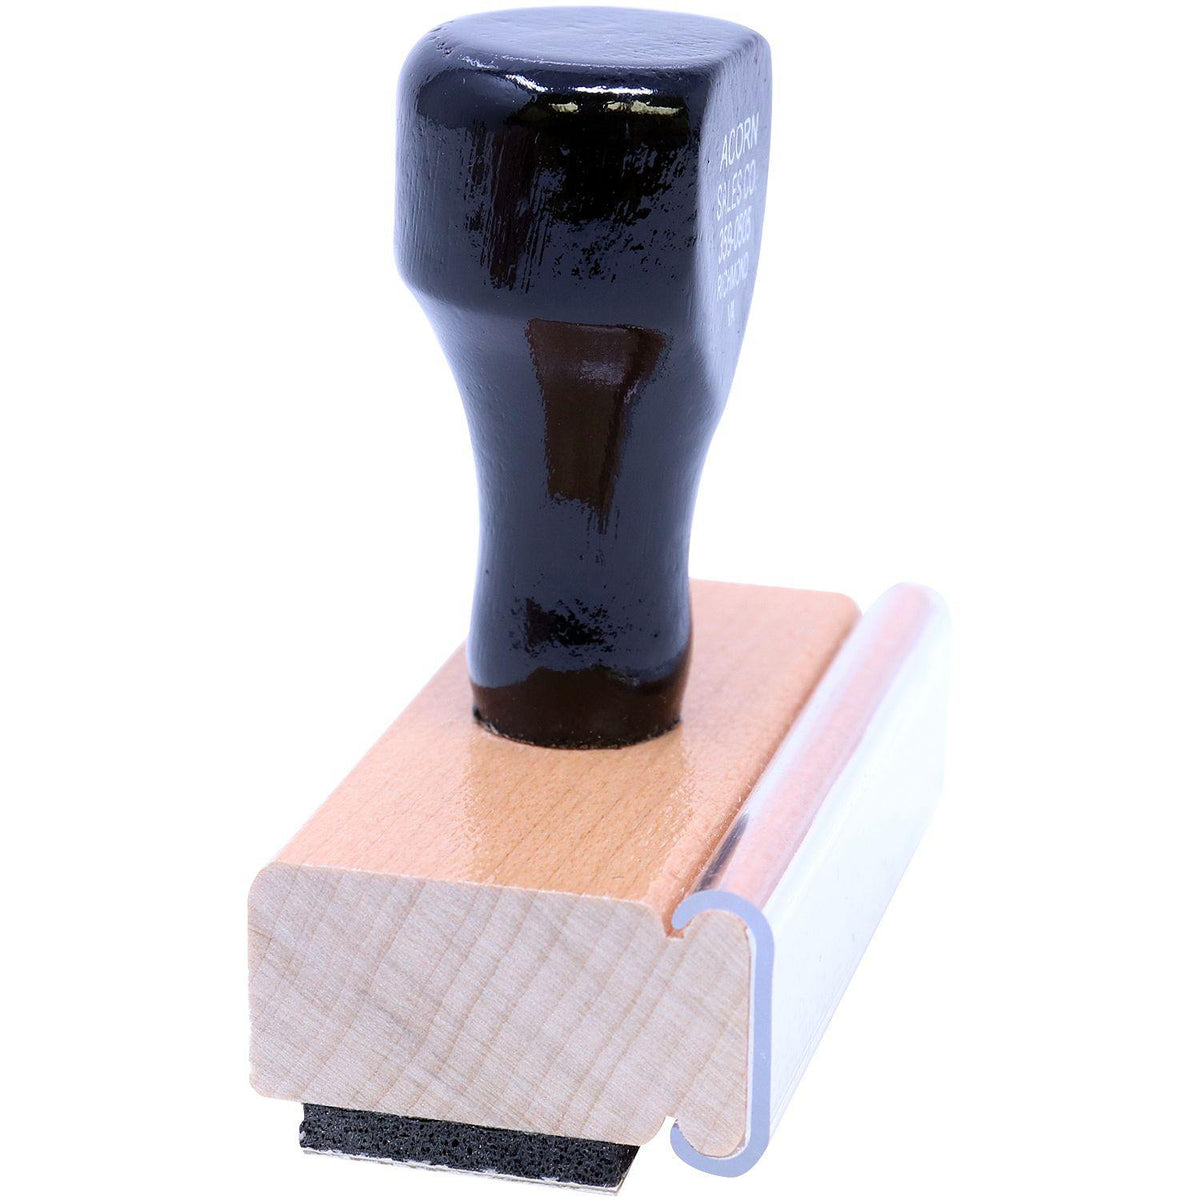 Outline Paid with Box Rubber Stamp - Engineer Seal Stamps - Brand_Acorn, Impression Size_Small, Stamp Type_Regular Stamp, Type of Use_Business, Type of Use_Finance, Type of Use_General